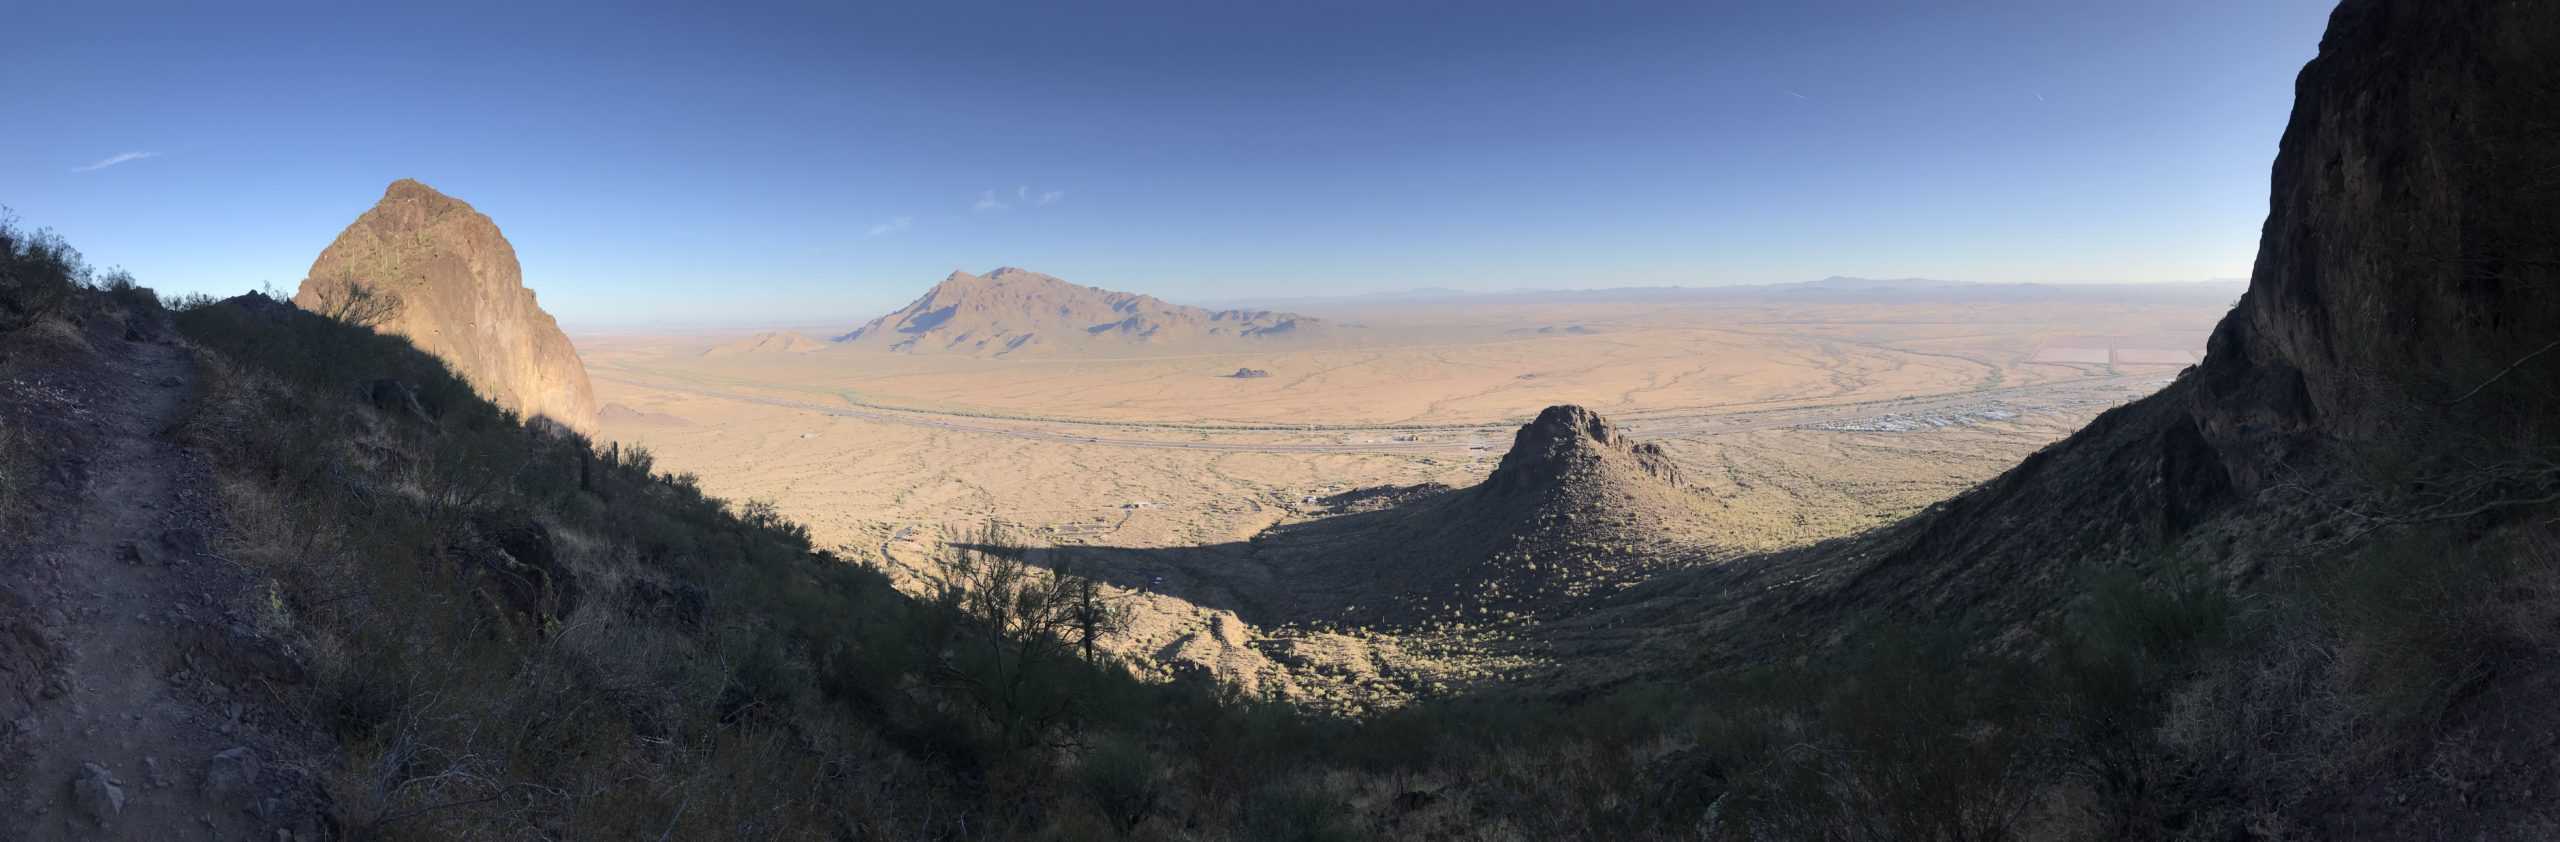 A panorama of the brown mountain range and brown desert below. Interstate 10 and the railroad tracks are visible. A clear blue sky. In Picacho Peak State Park between Tucson and Phoenix, Arizona, United States.